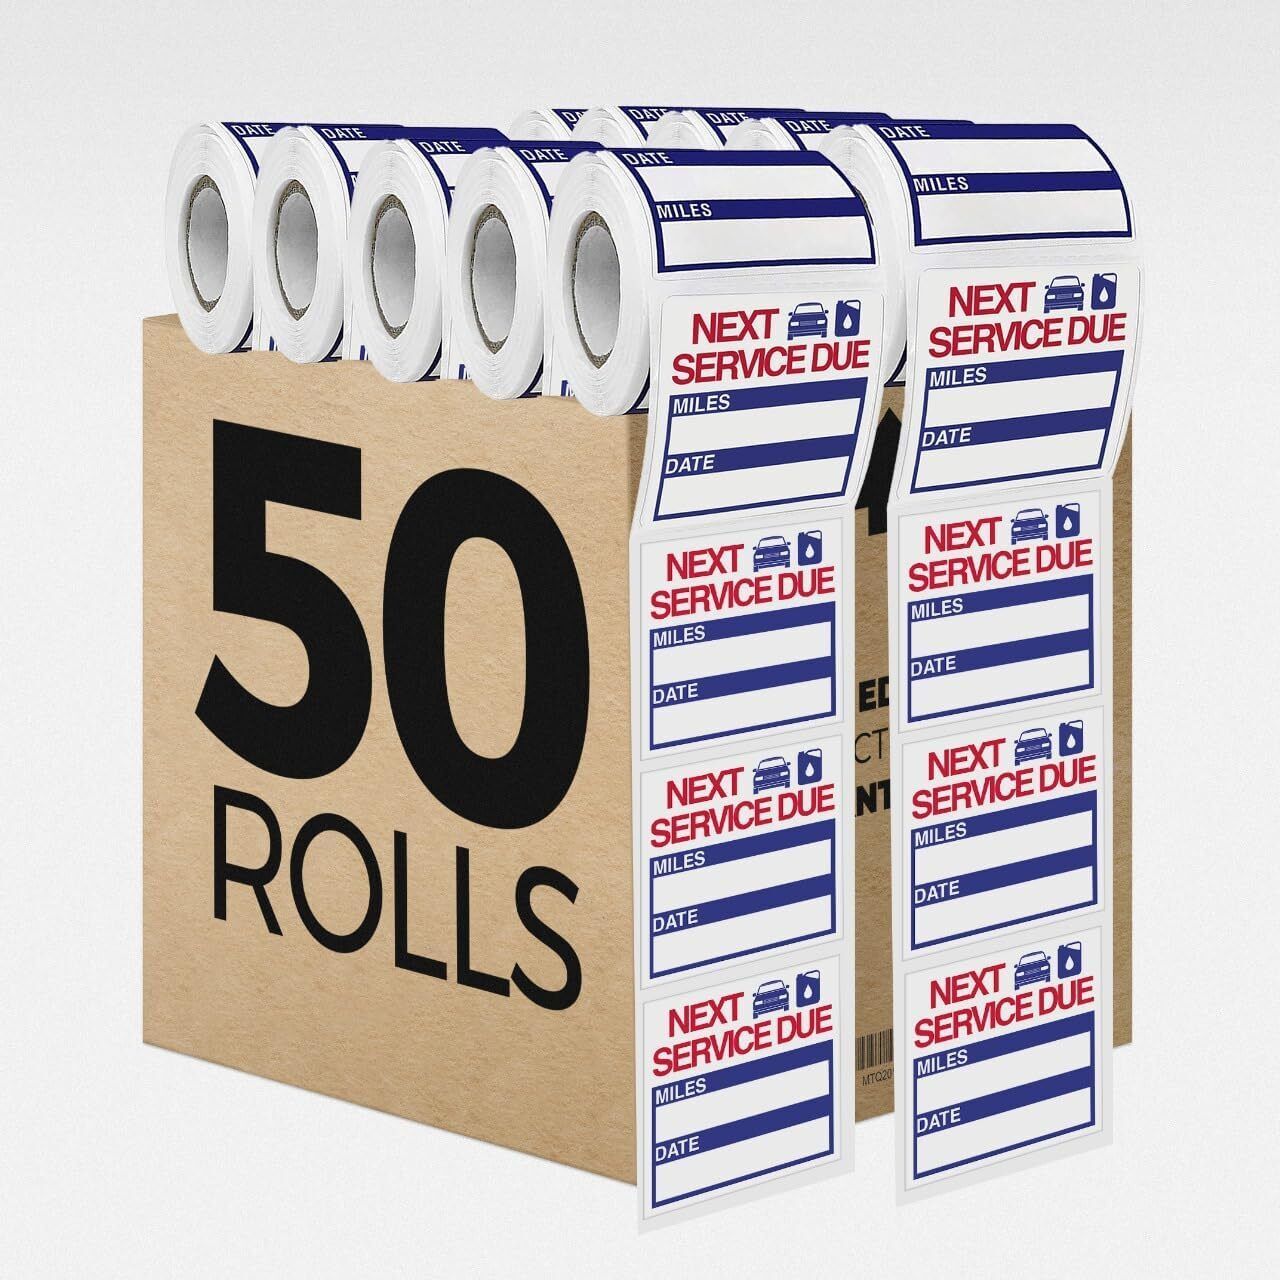 PERFORMORE 2” x 2” Oil Change Stickers, 300 Sitckers Per Roll. 50 Rolls